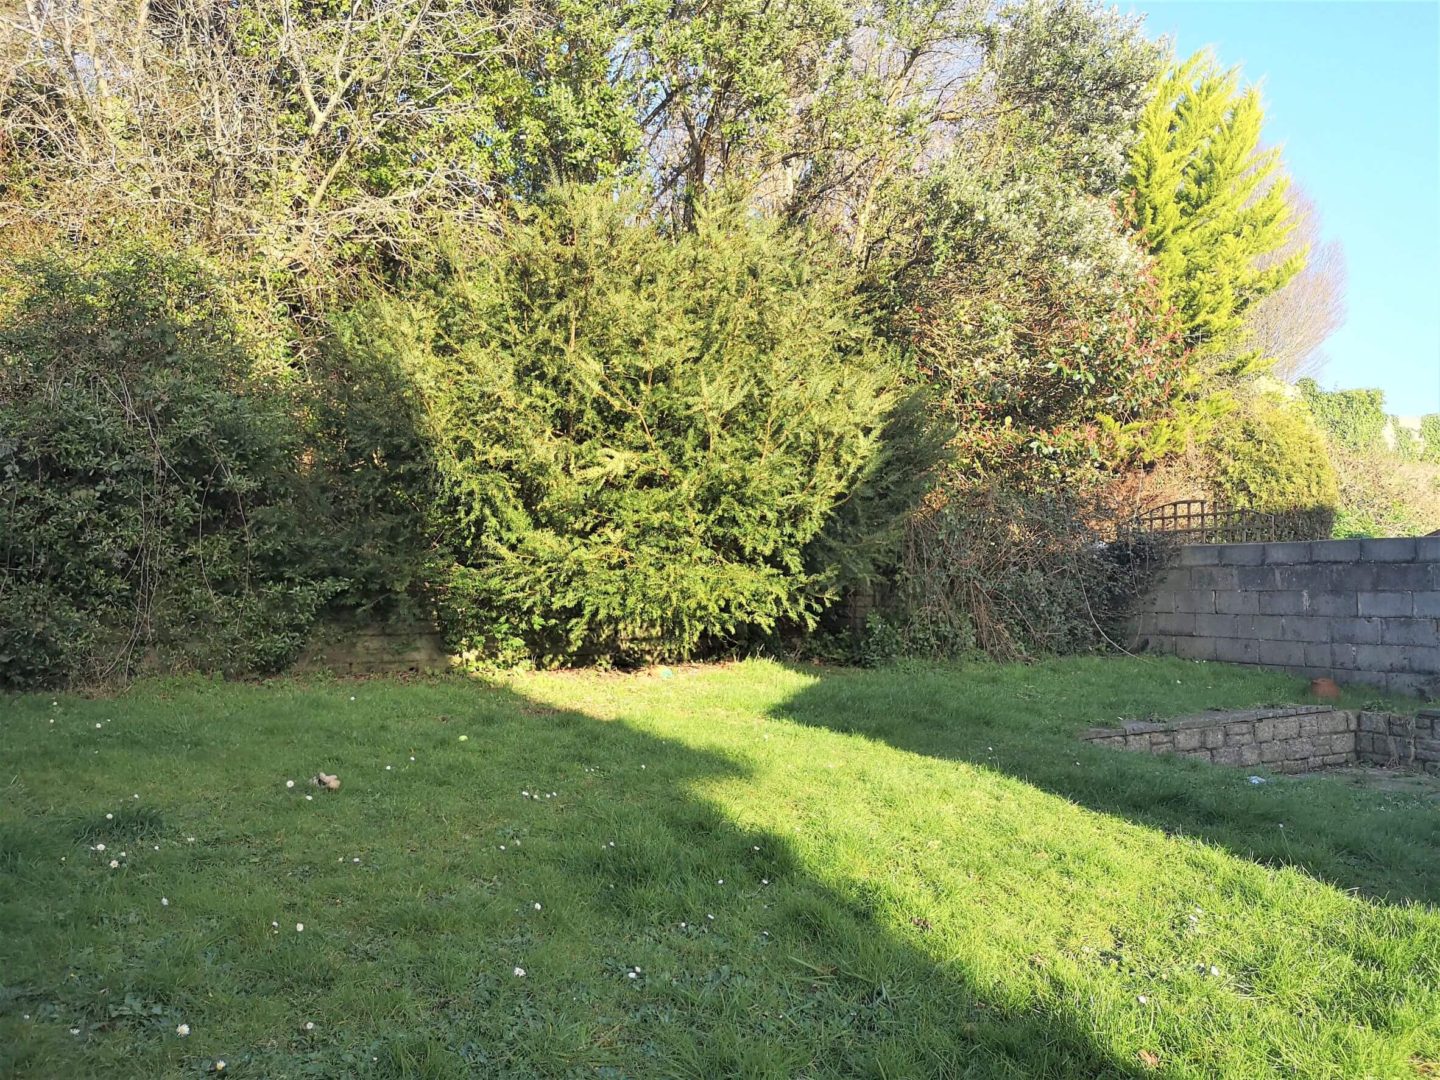 A back garden with overgrown grass. Bushes and trees are also overgrown at the back of the garden.